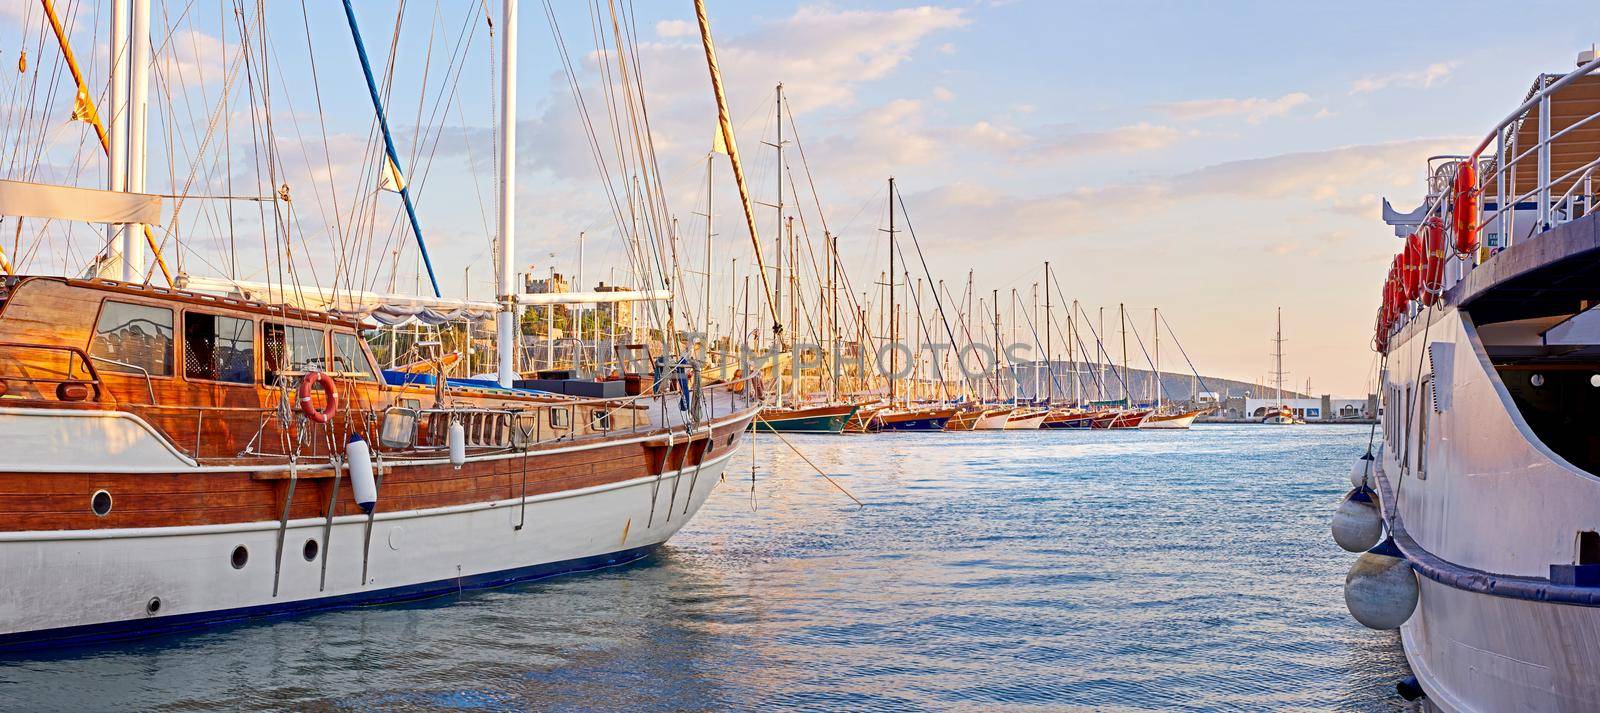 The marine harbor of Bodrum, Turkey. Scenic view of expensive yachts moored in Milta Marina. Closeup of boats and yachts docked at a port or pier during sunset on the water during a warm summer day by YuriArcurs